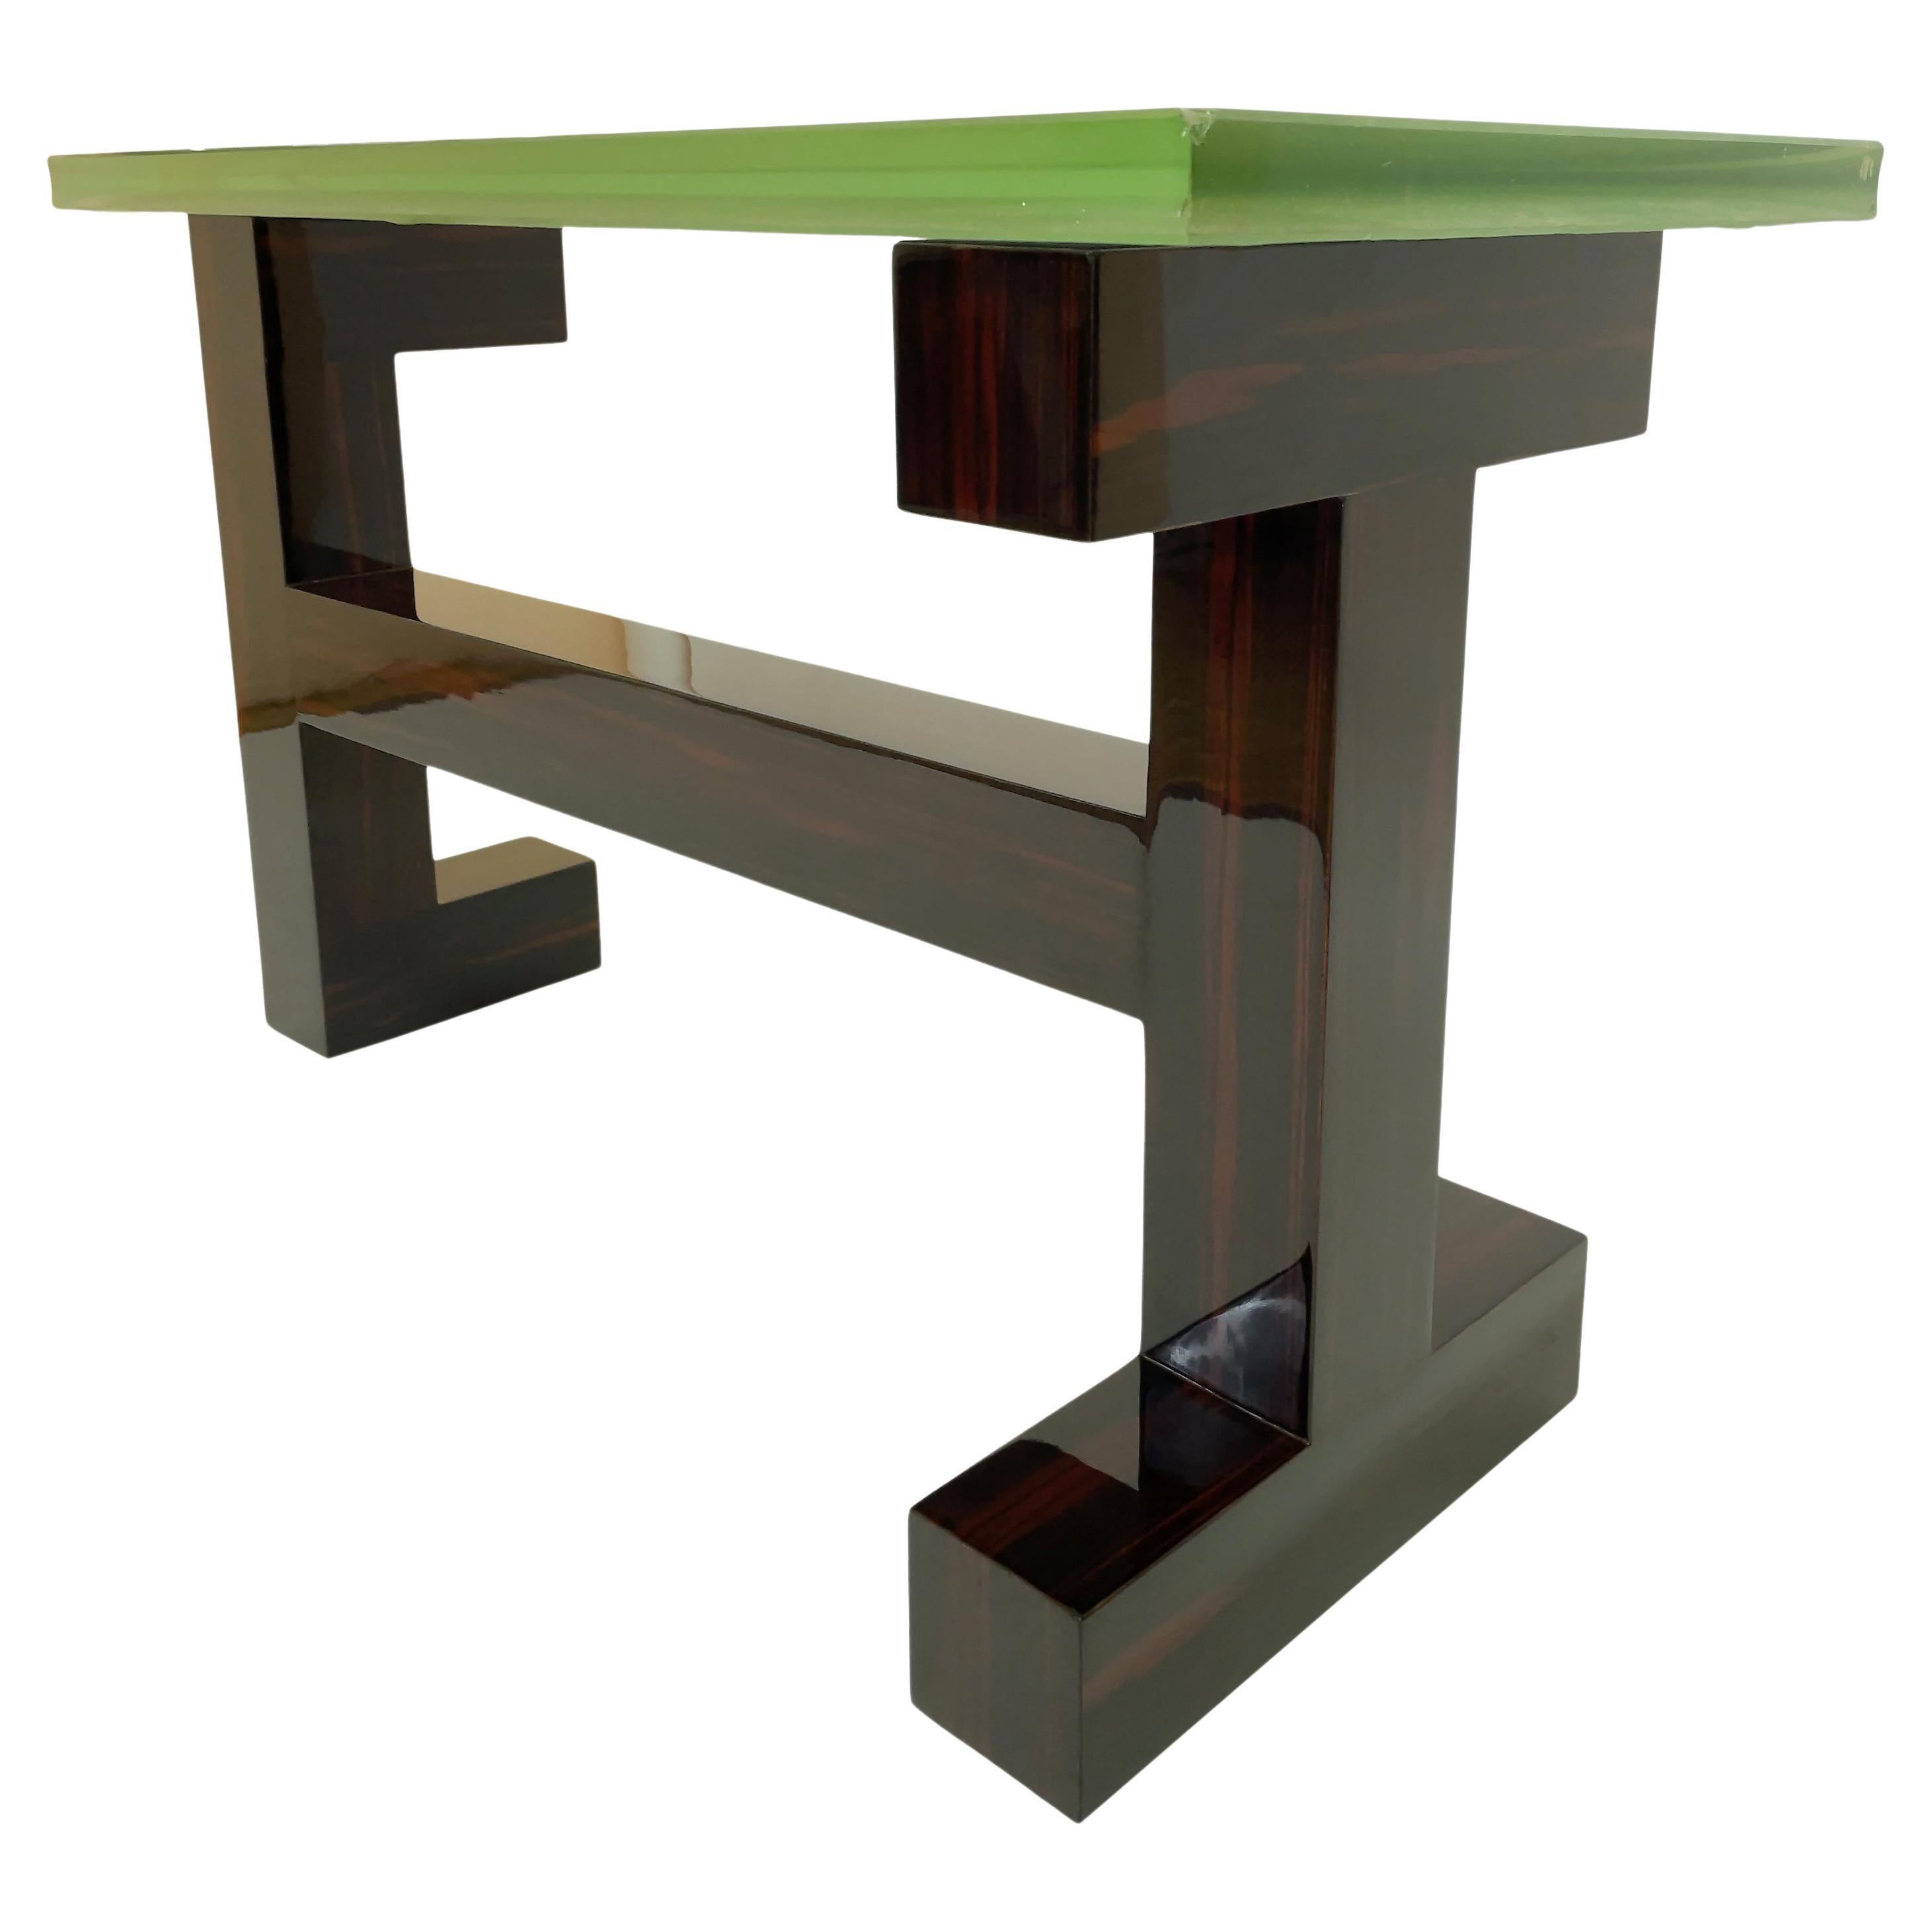 1930's Modernist Art Deco Console Table in Macassar Wood and Thick Glass Top For Sale